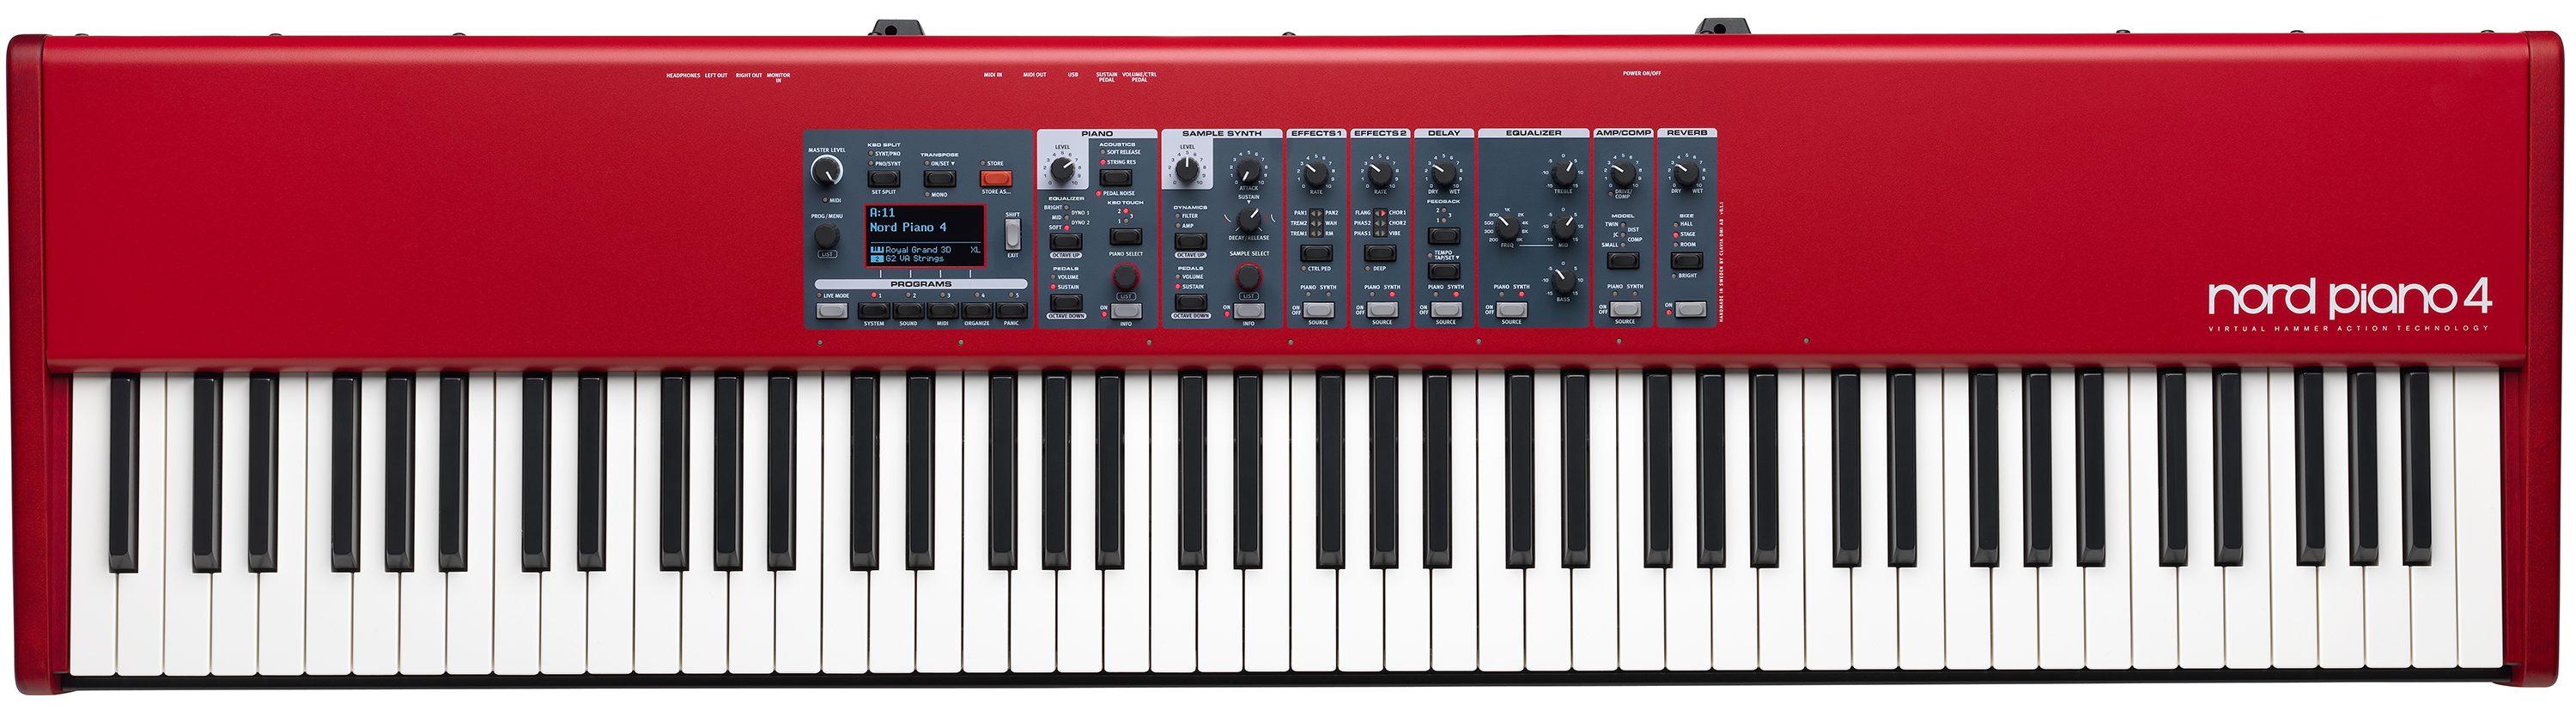 Nord Piano 4 | Nord Keyboards